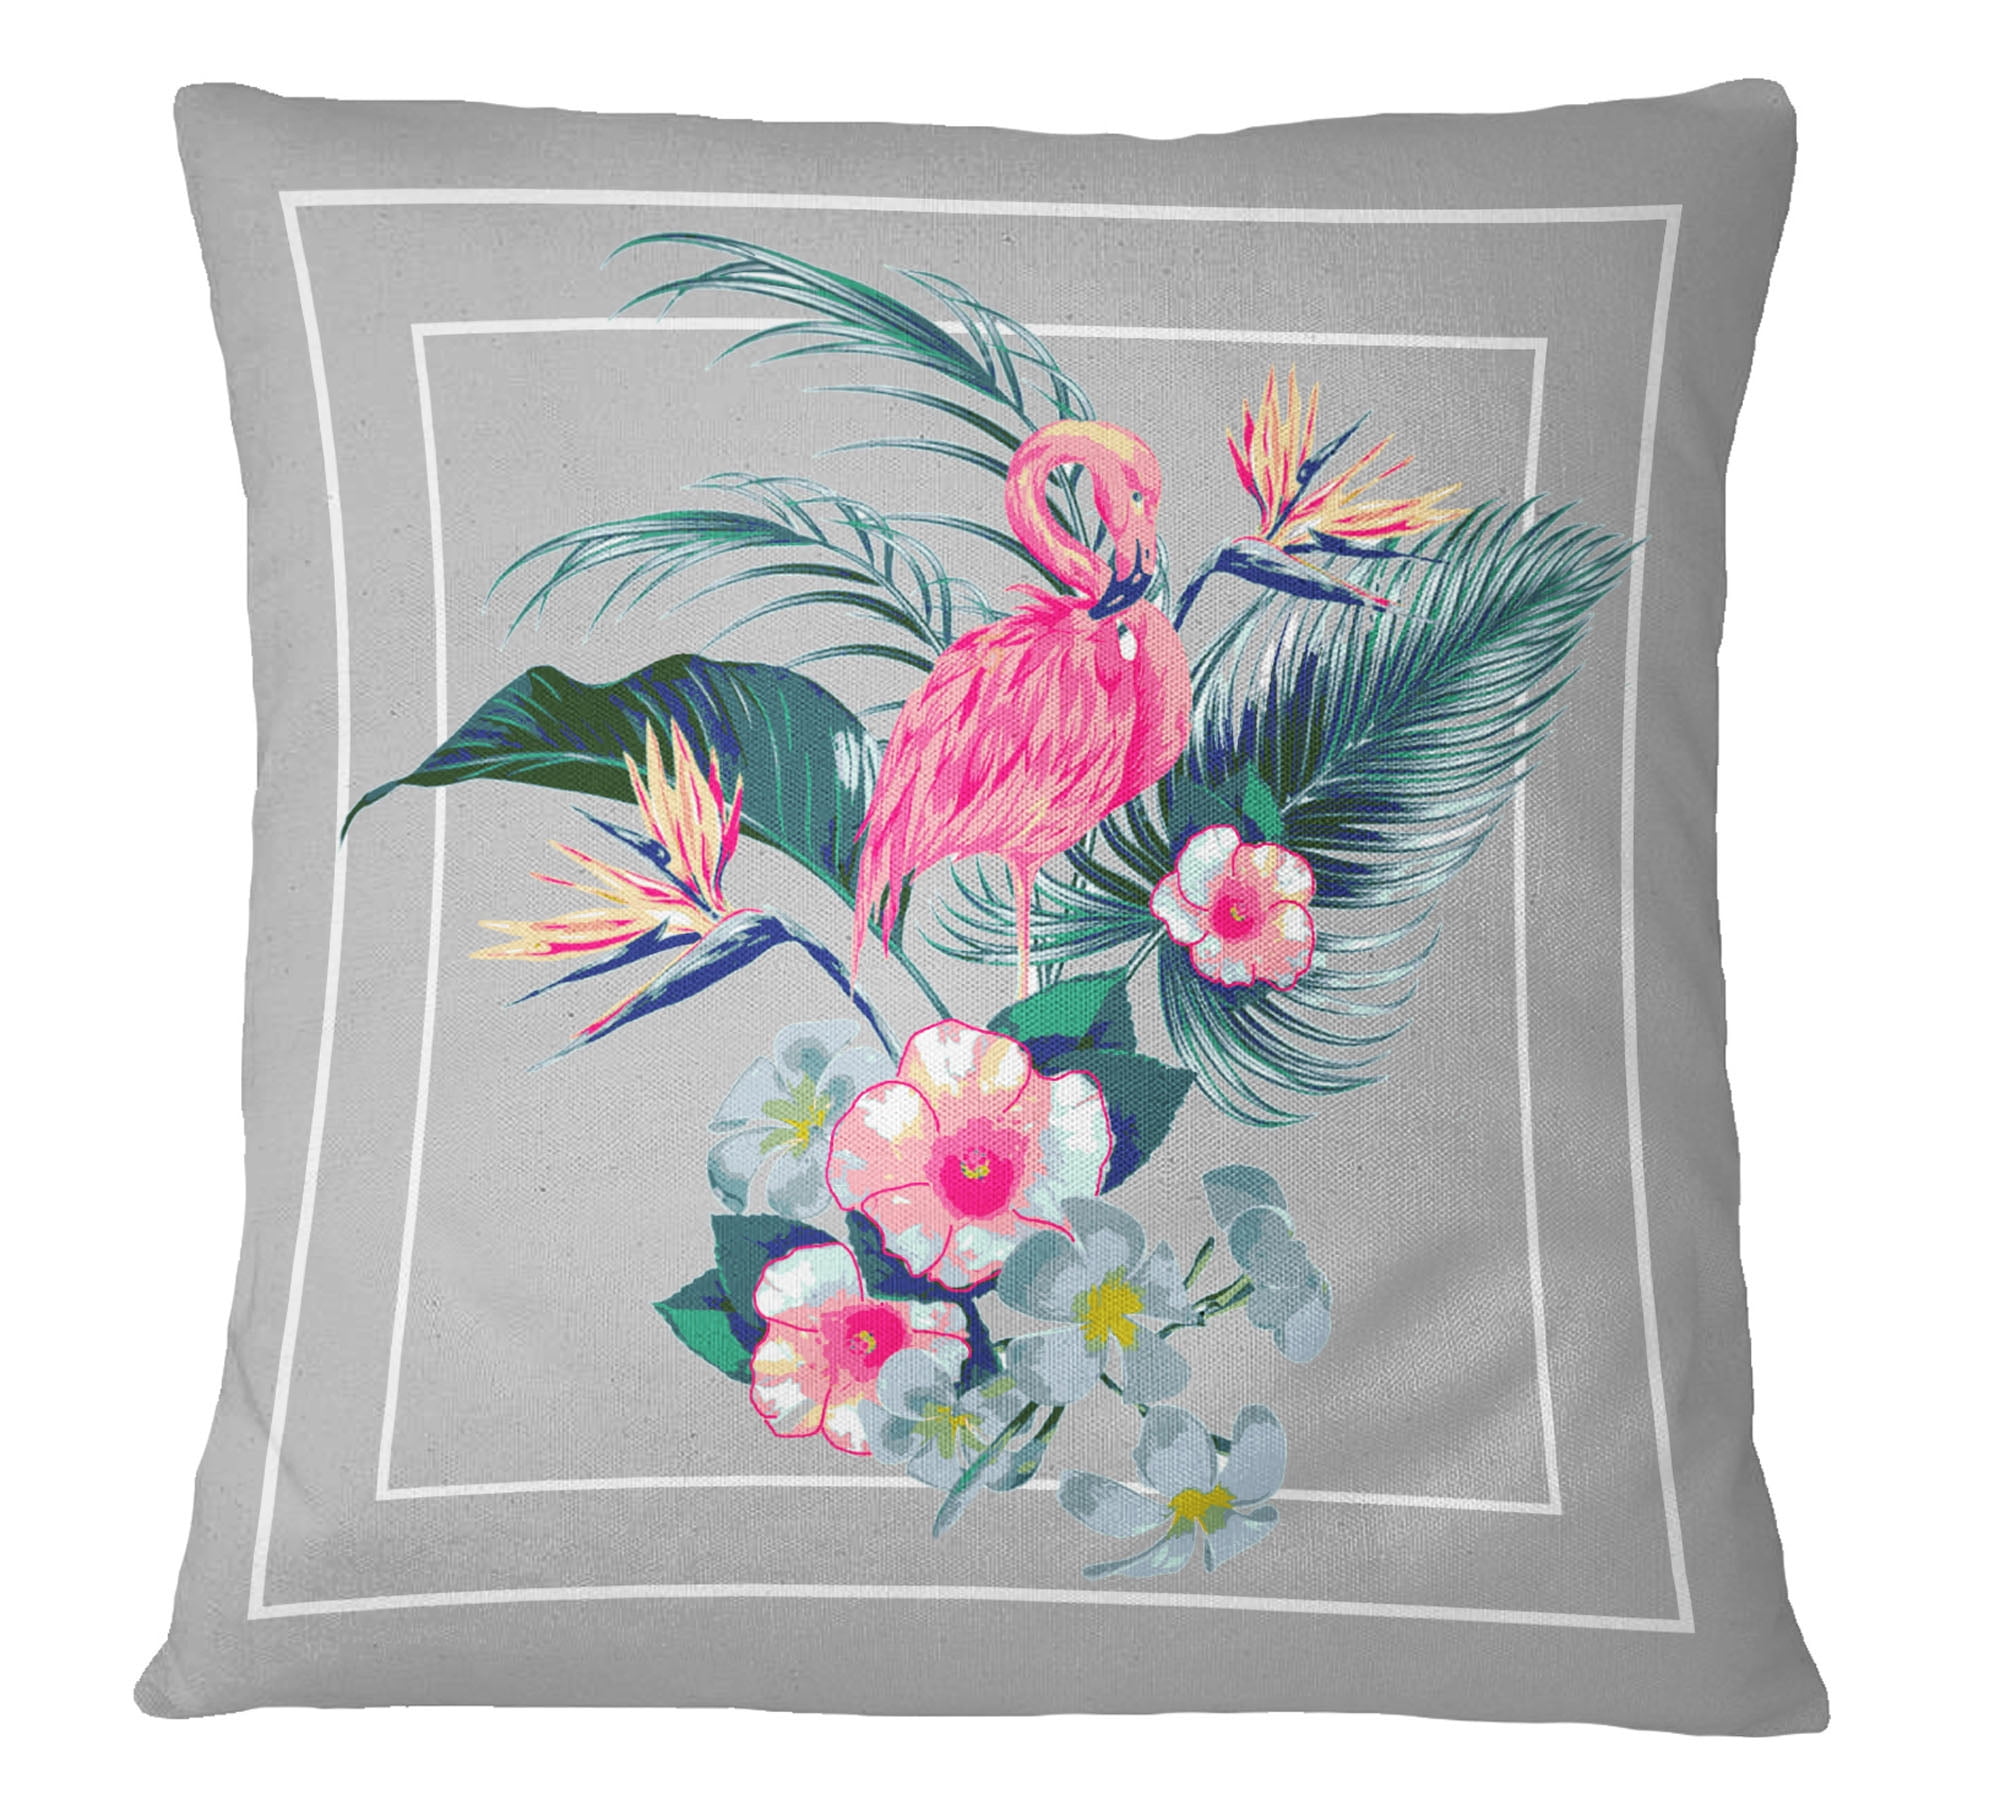 S4Sassy Decorative Gray Pillow Case Floral Print Square Cushion Cover 